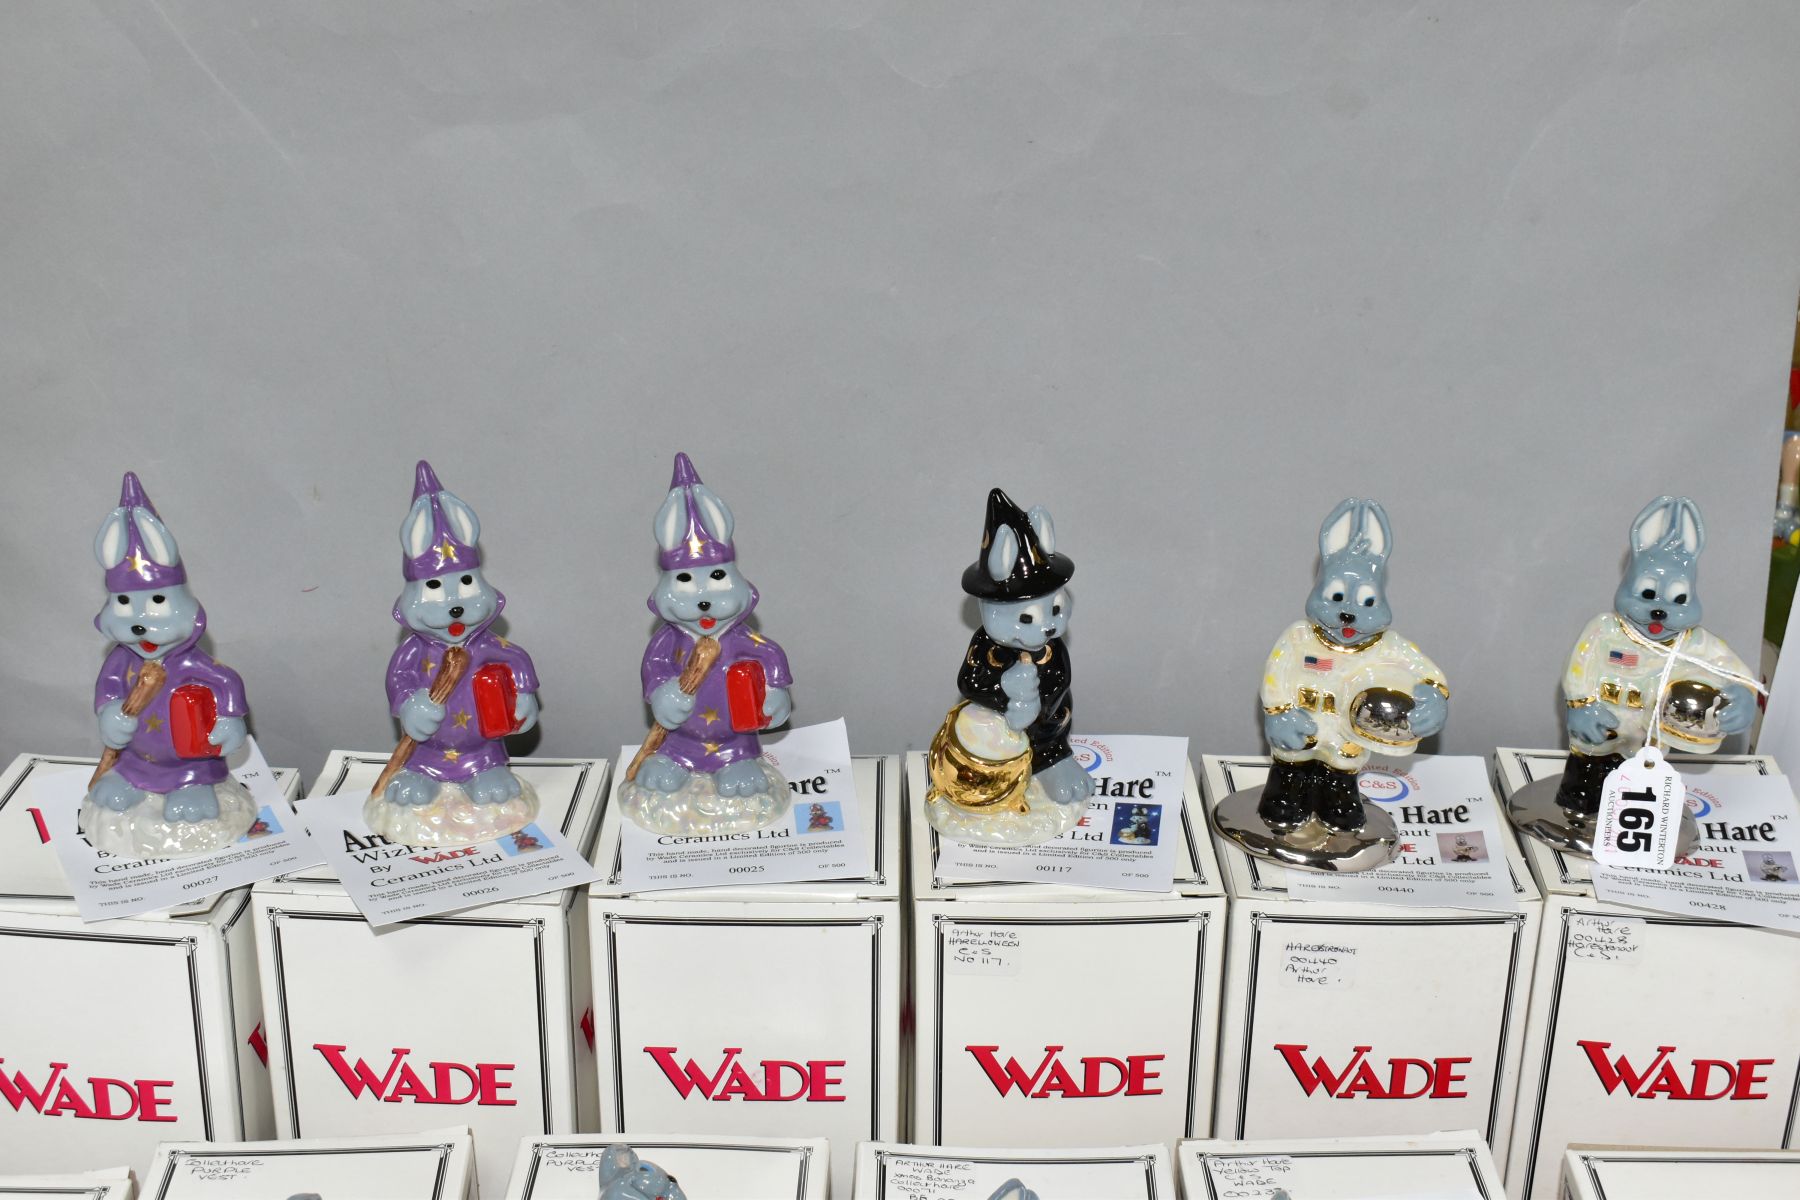 SIX BOXED LIMITED EDITION WADE ARTHUR HARE FIGURES FROM THE VILLAGE PEOPLE COLLECTION, style two,